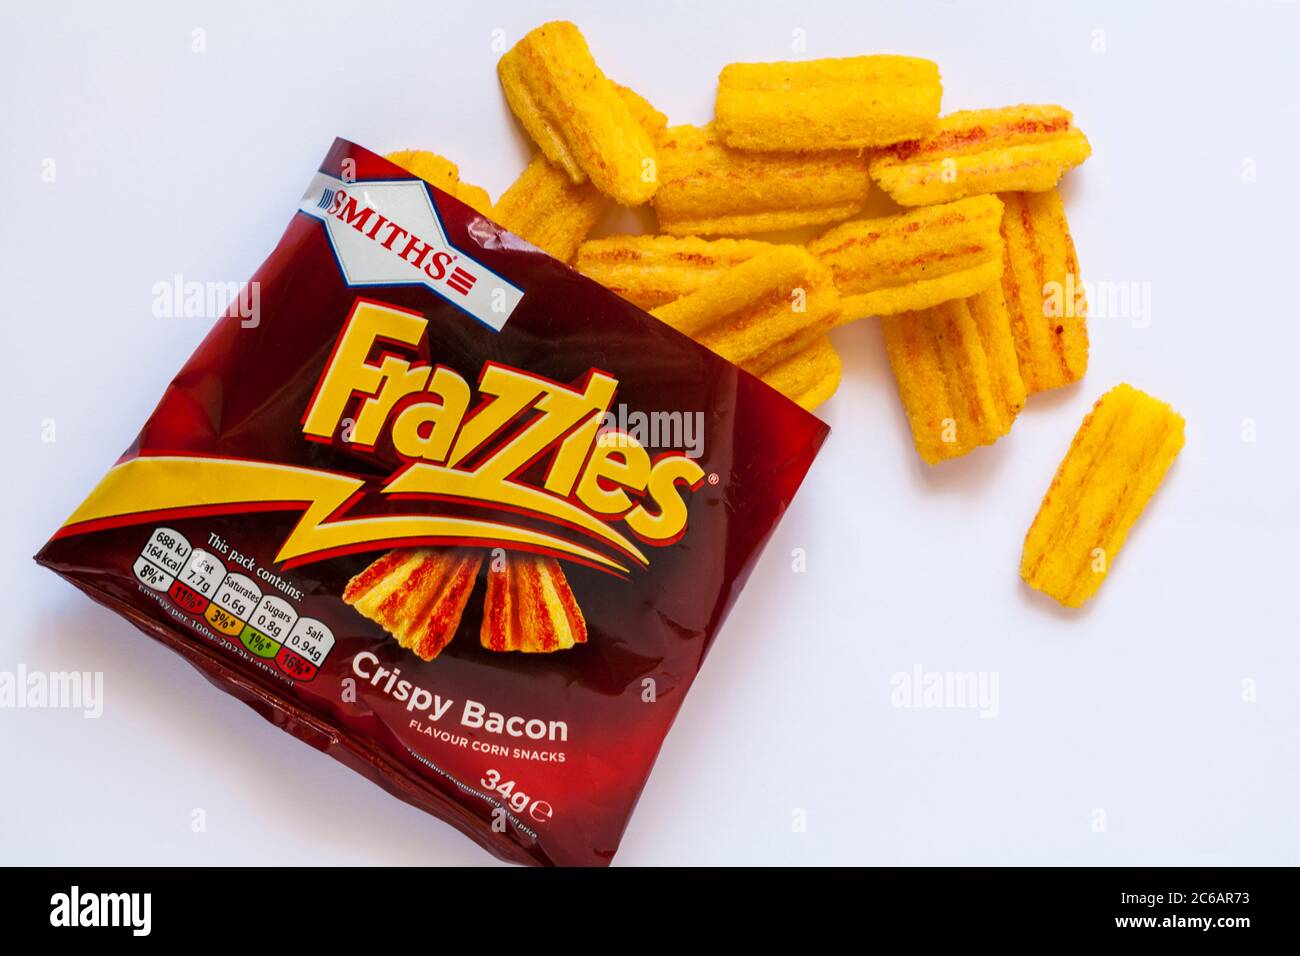 packet of Smiths Frazzles Crispy Bacon flavour corn snacks opened with contents spilled spilt set on white background Stock Photo